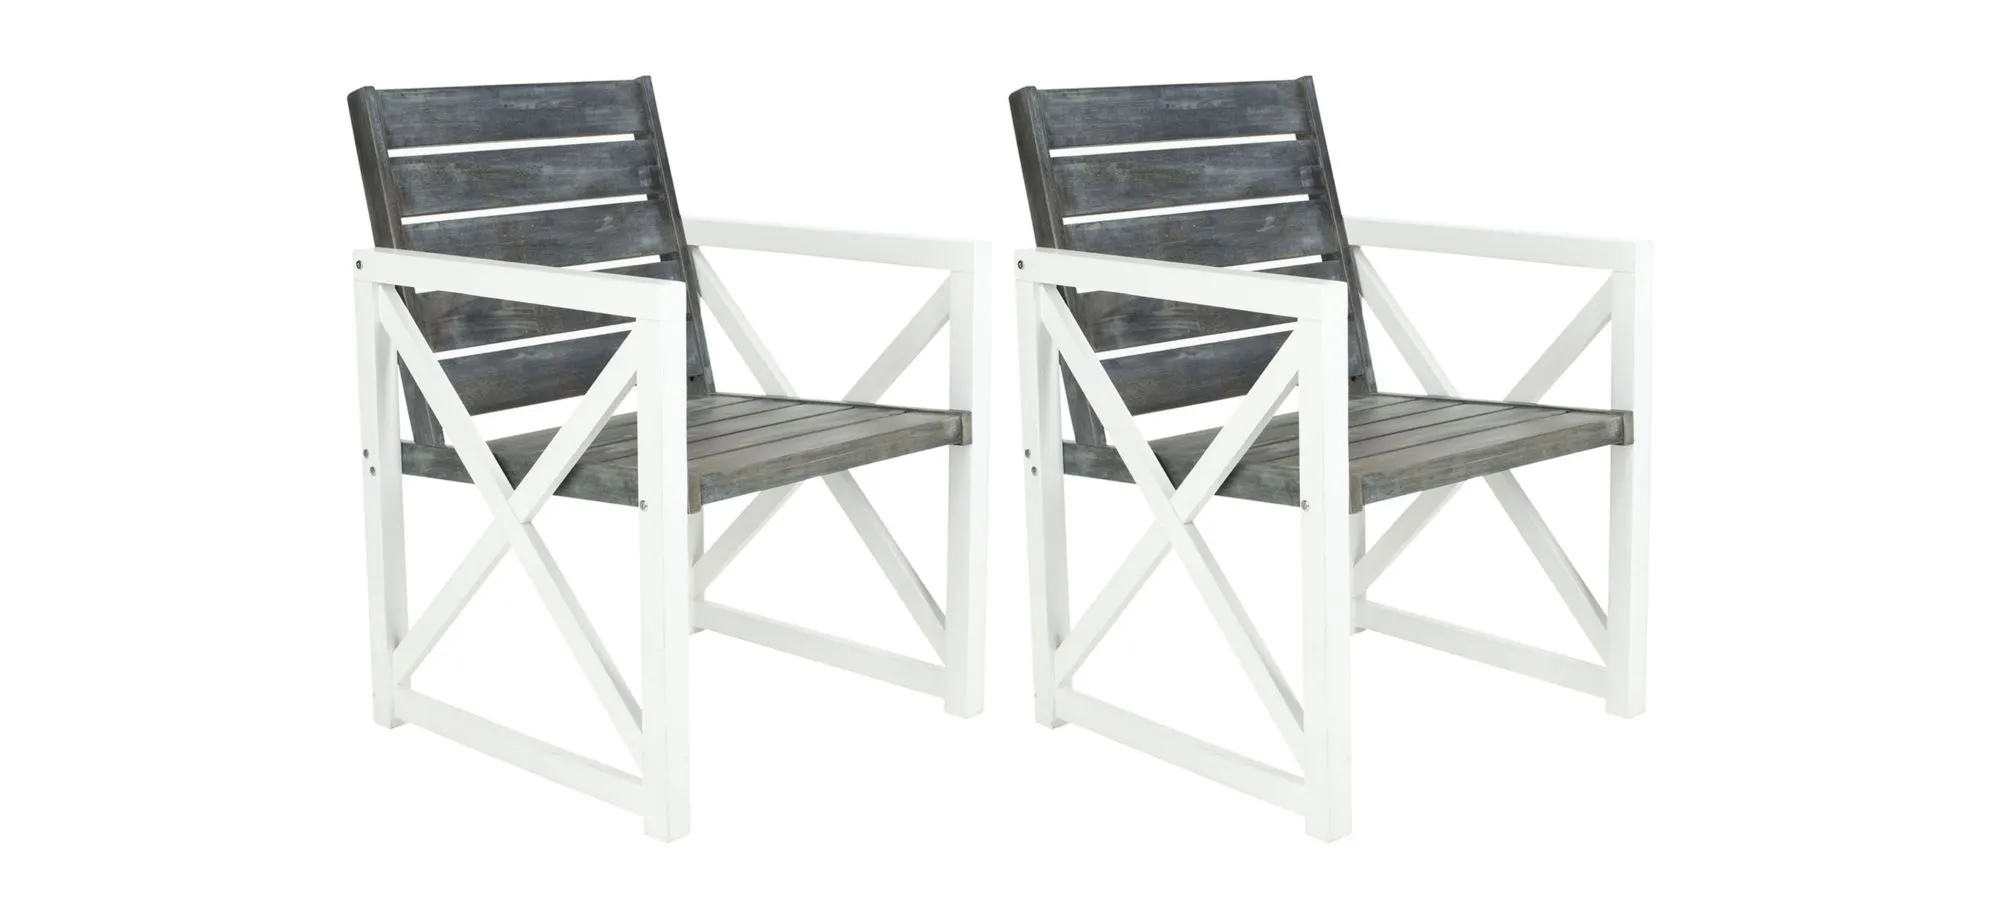 Bertie Outdoor Armchair - Set of 2 in Taupe Stripes by Safavieh